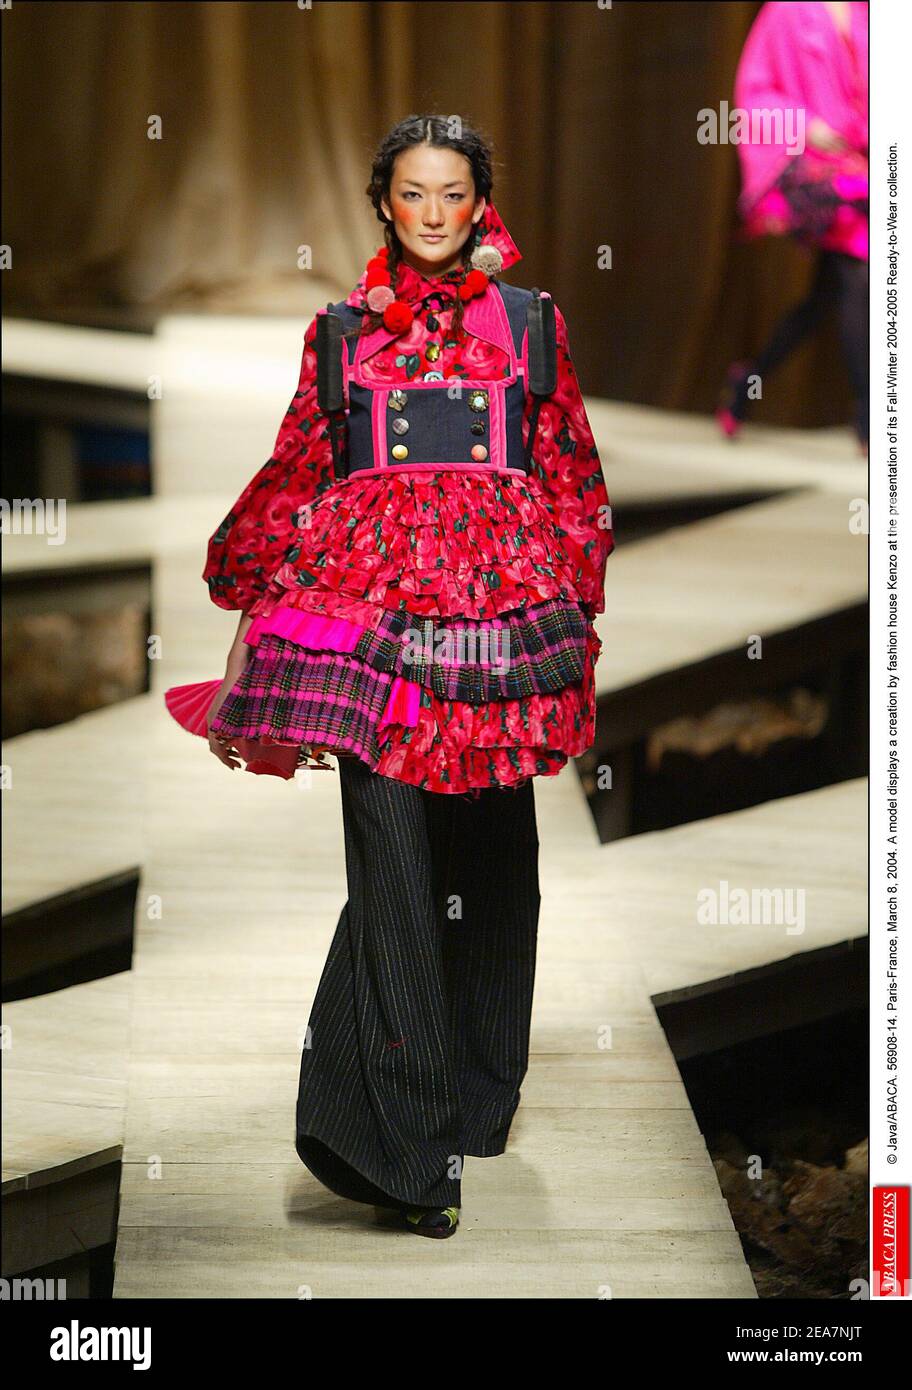 © Java/ABACA. 56908-14. Paris-France, March 8, 2004. A model displays a creation by fashion house Kenzo at the presentation of its Fall-Winter 2004-2005 Ready-to-Wear collection. Stock Photo